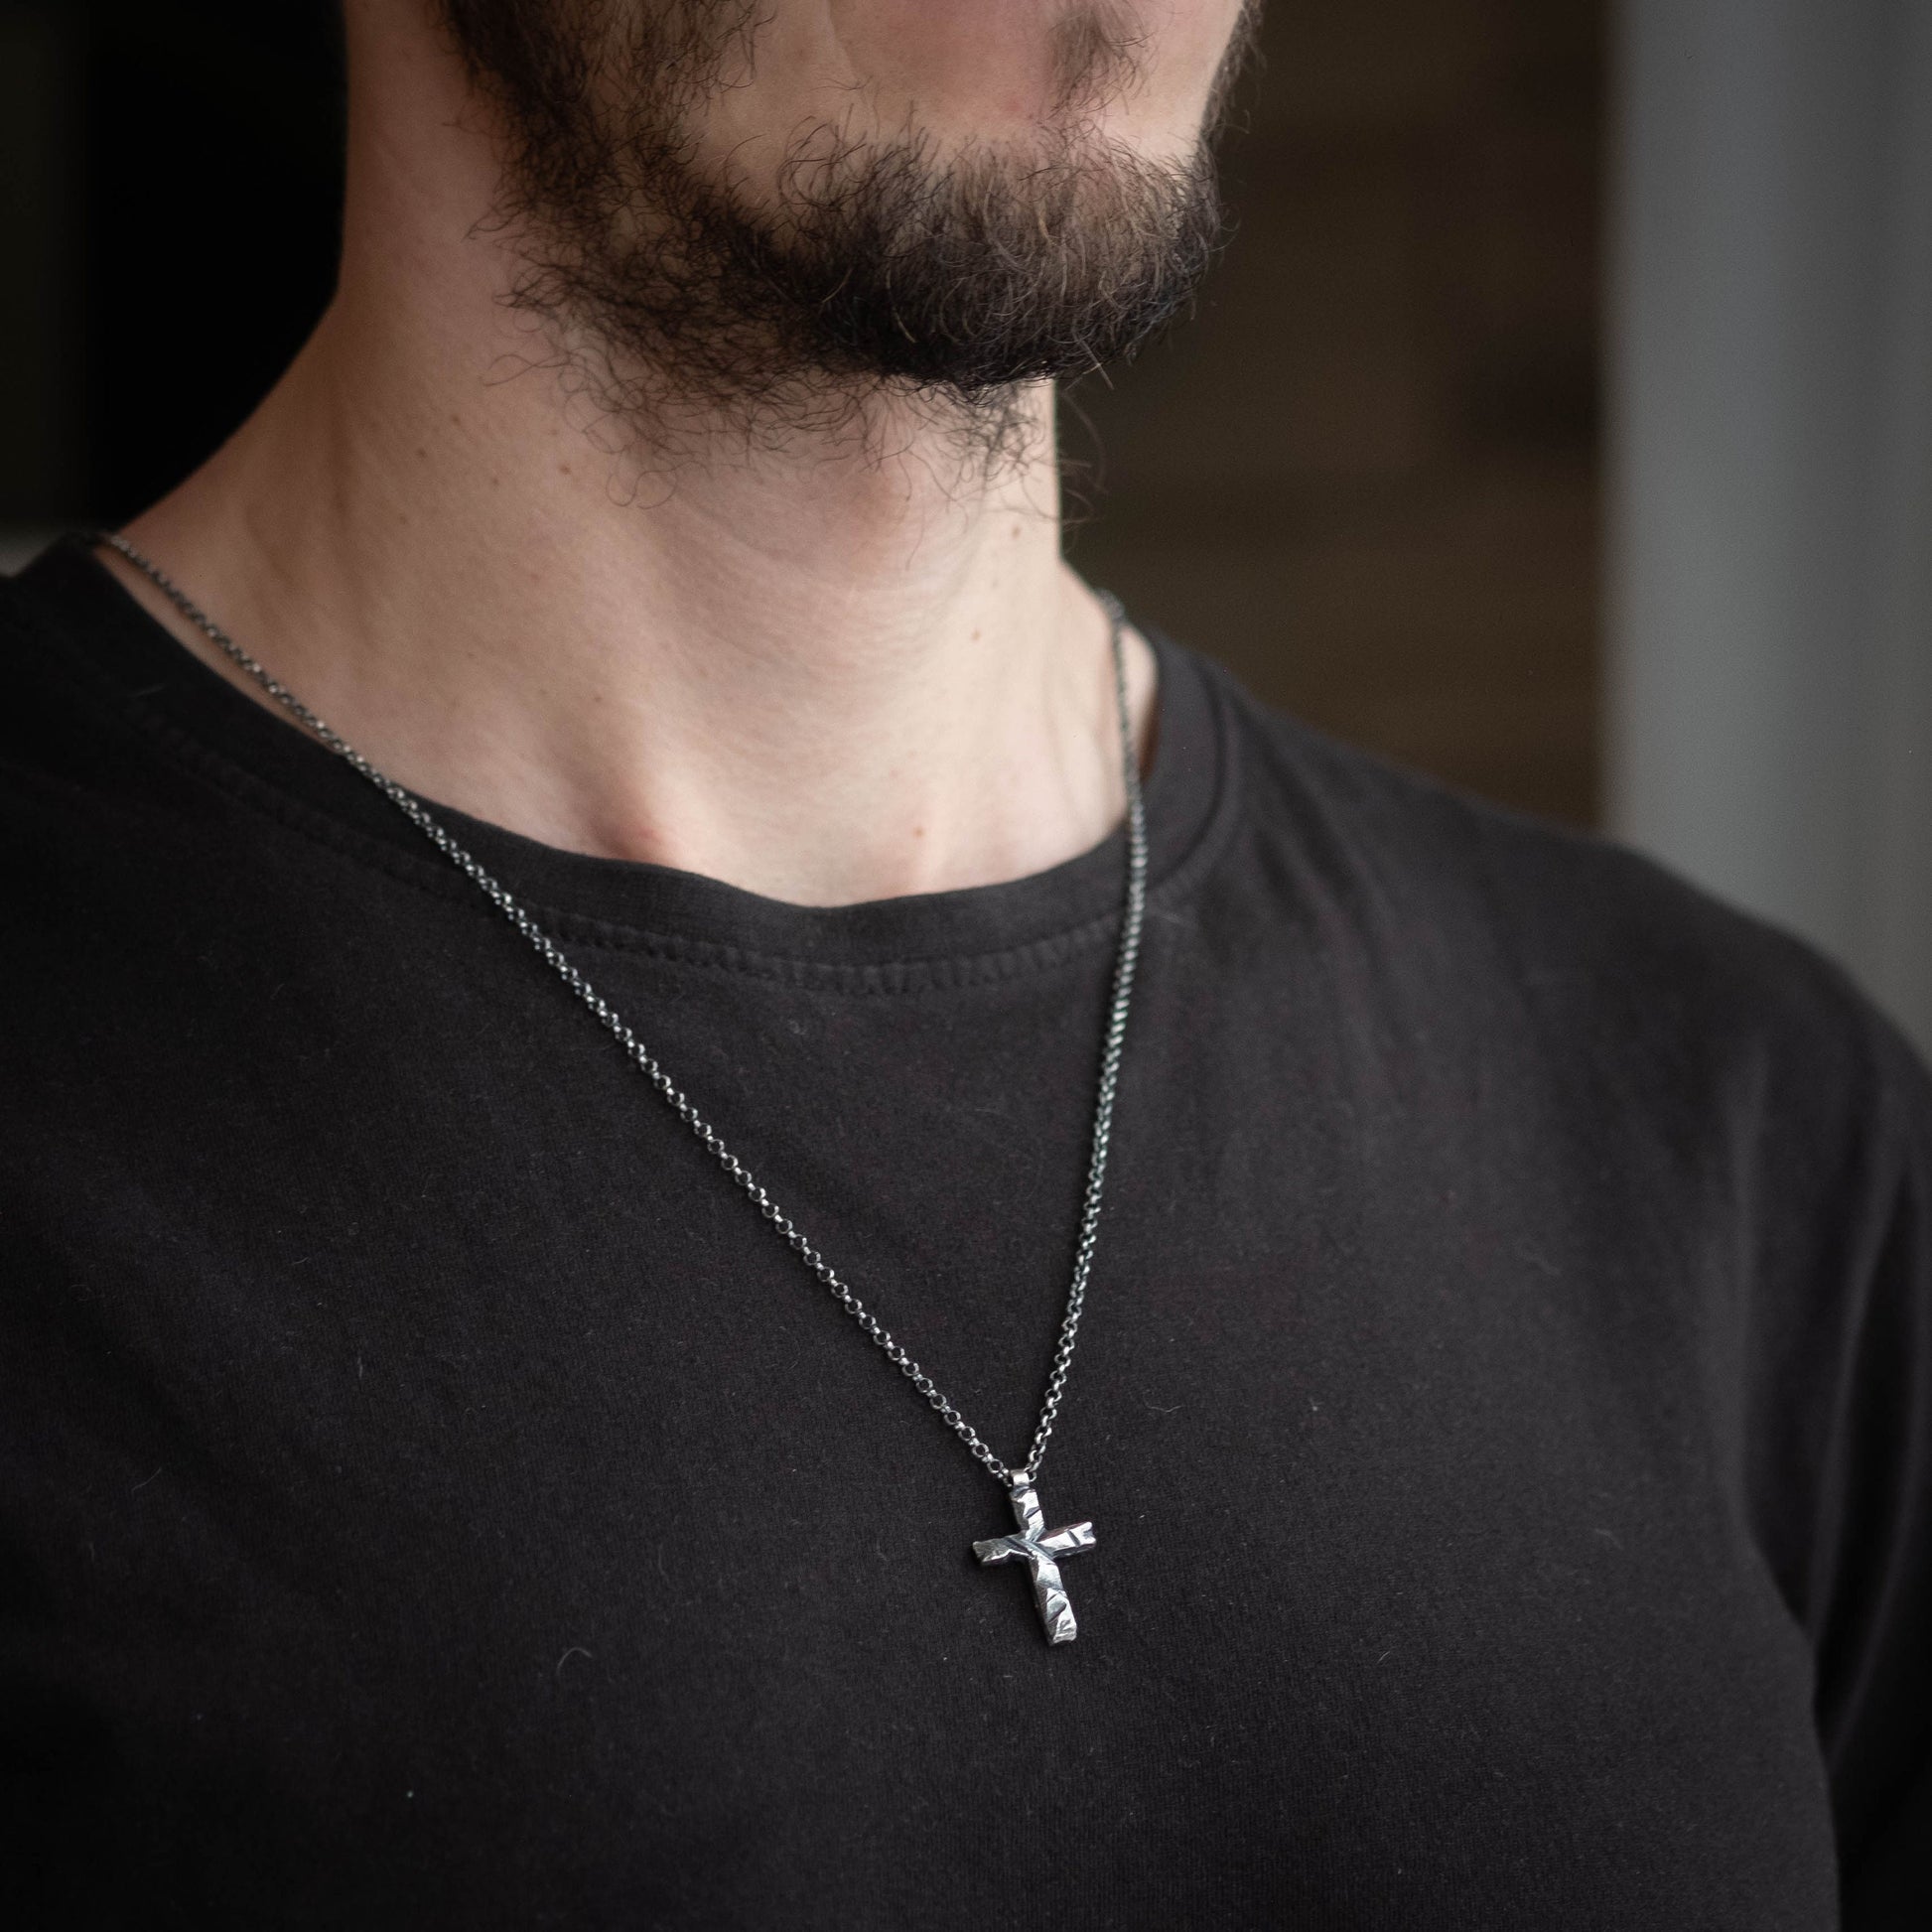 Cross Mens necklace, Strength pendant necklace, Christian gifts, Handmade jewelry, Boyfriend gift, Husband gift, nature jewelry,